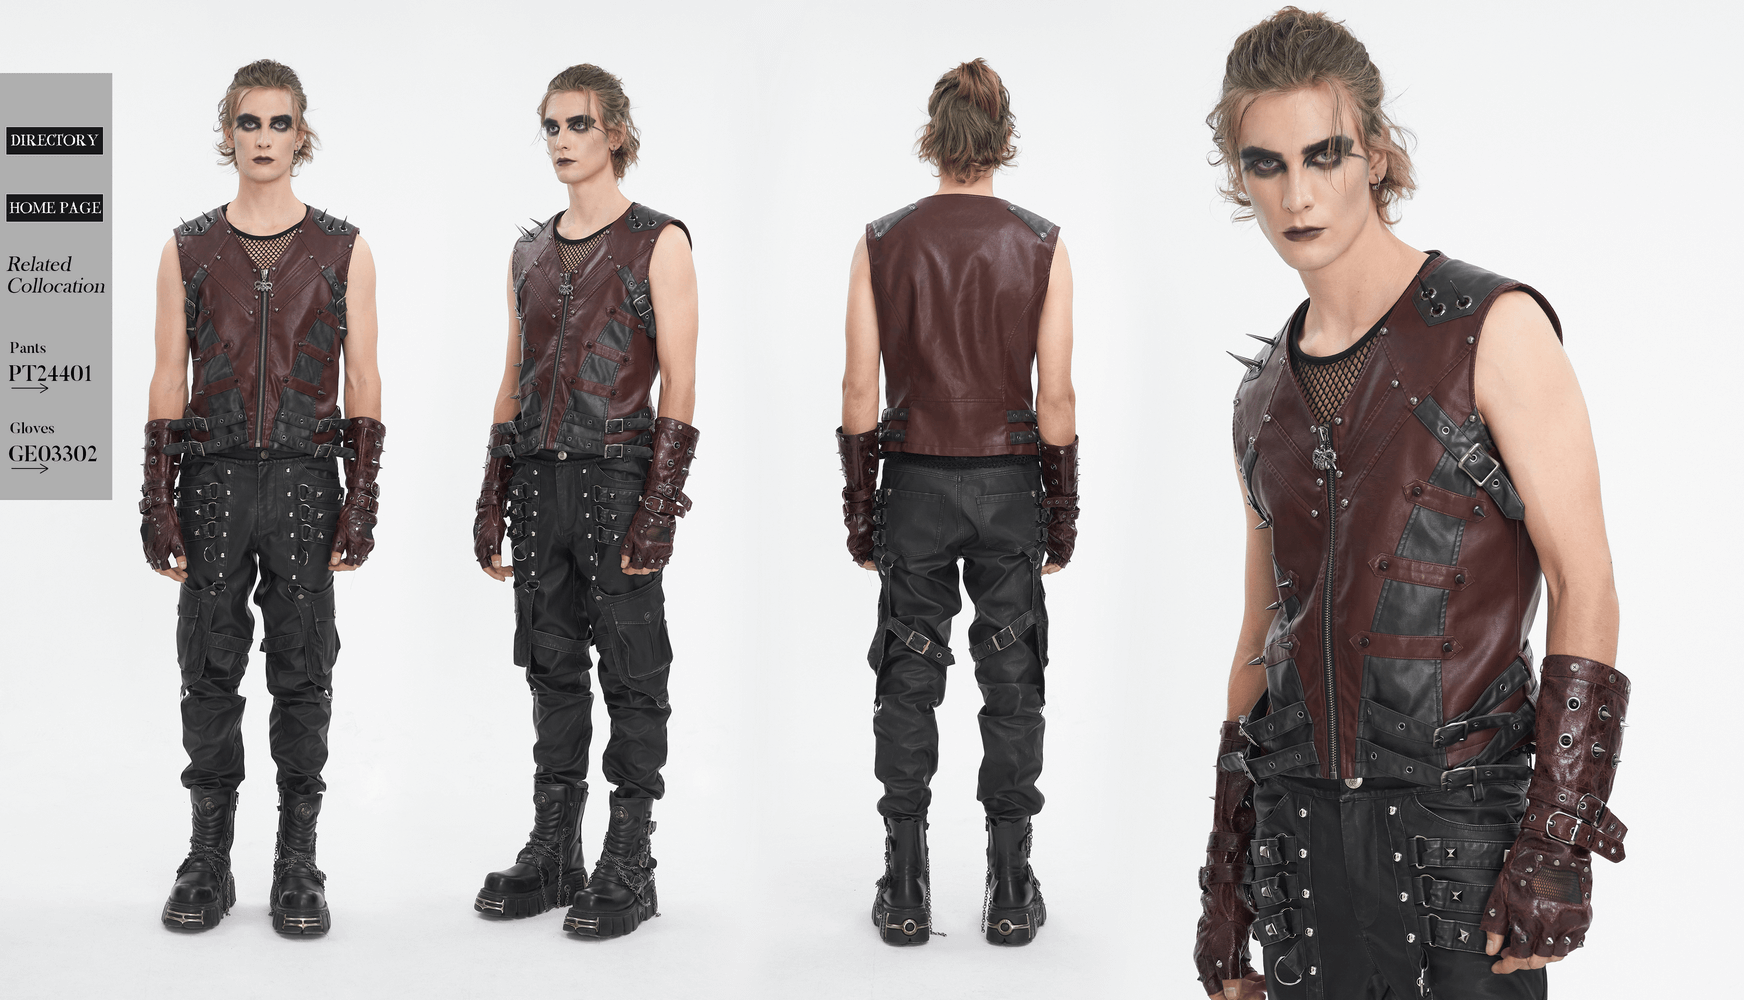 Men's Gothic Punk Studded Synthetic Leather Vest